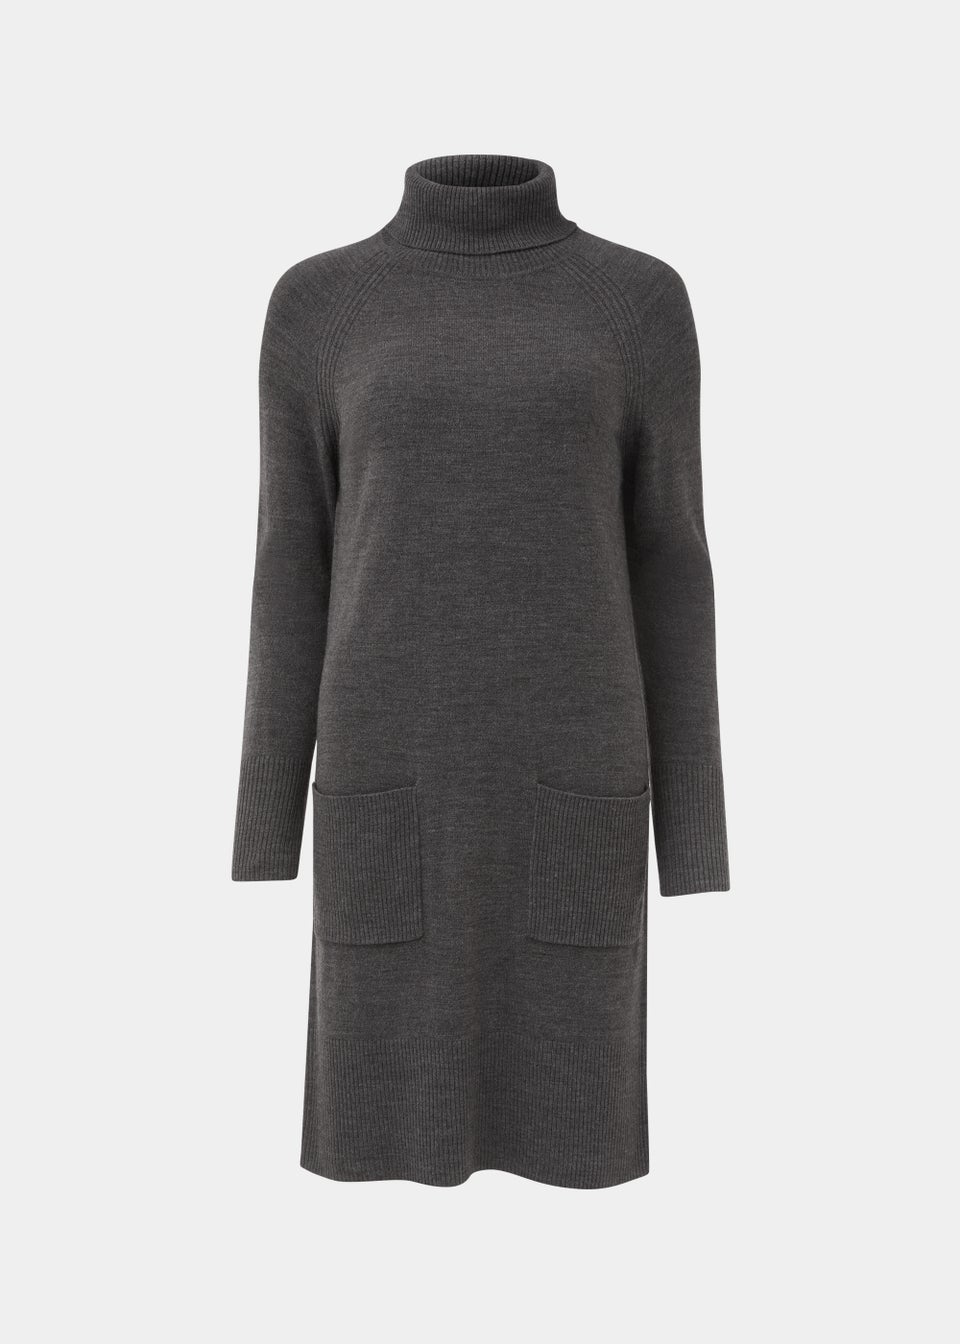 Charcoal Super Soft Roll Neck Knitted Tunic Dress